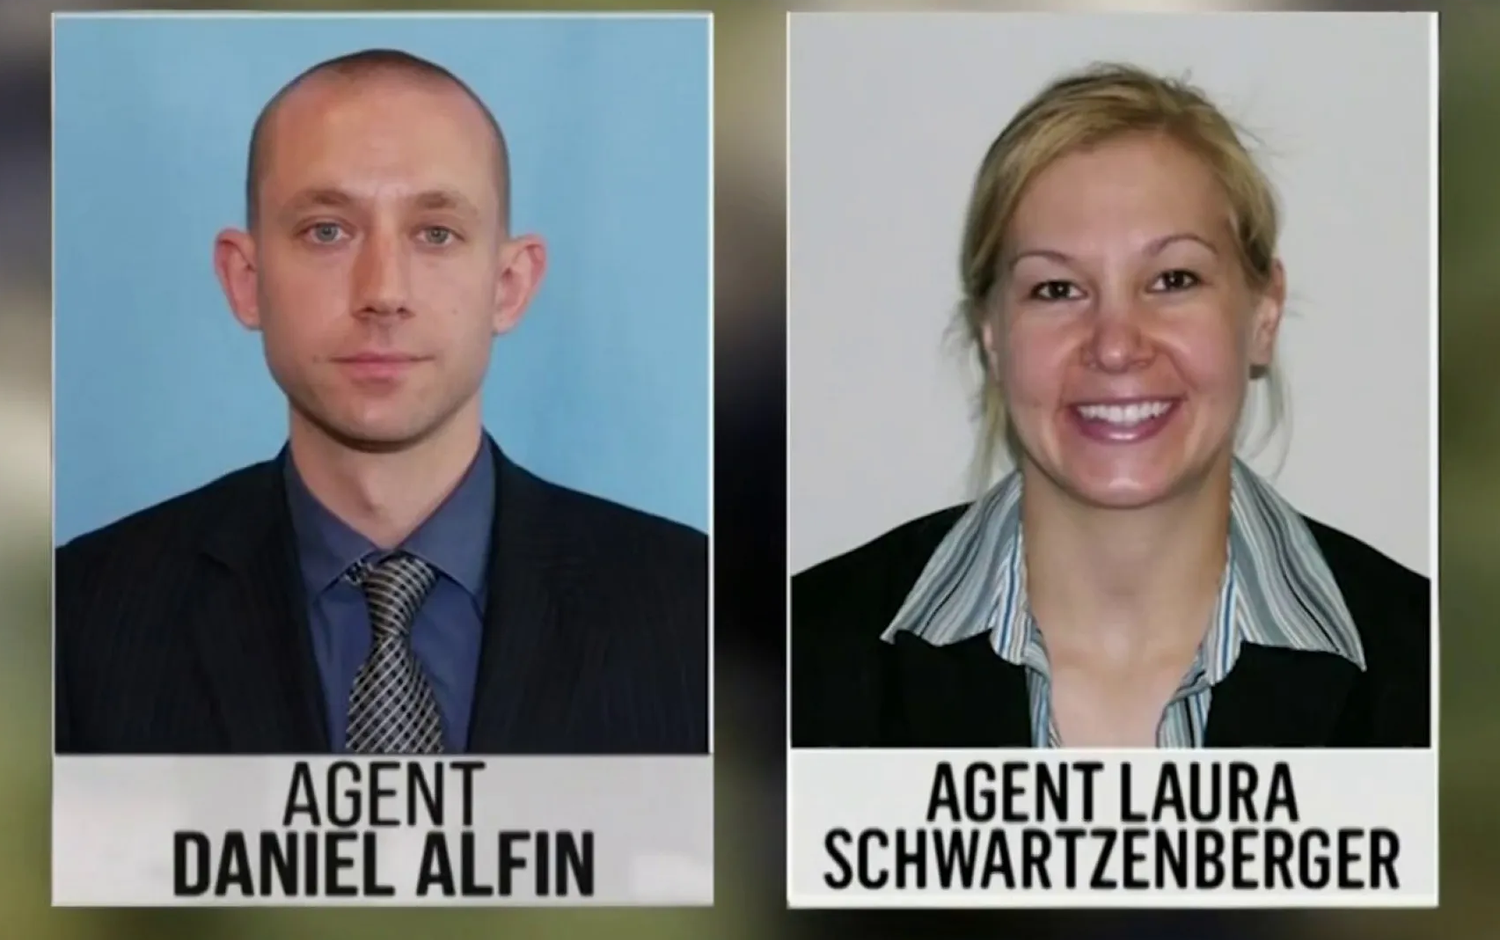 An investigation by the FBI and Australian Federal Police after the murder of two FBI agents uncovered an international pedophile ring, leading to 98 arrests. FBI agents Laura Schwartzenberger and Daniel Alfin were killed while serving a warrant for child abuse material in Florida two years ago. Photos courtesy of Tunnel to Towers Foundation